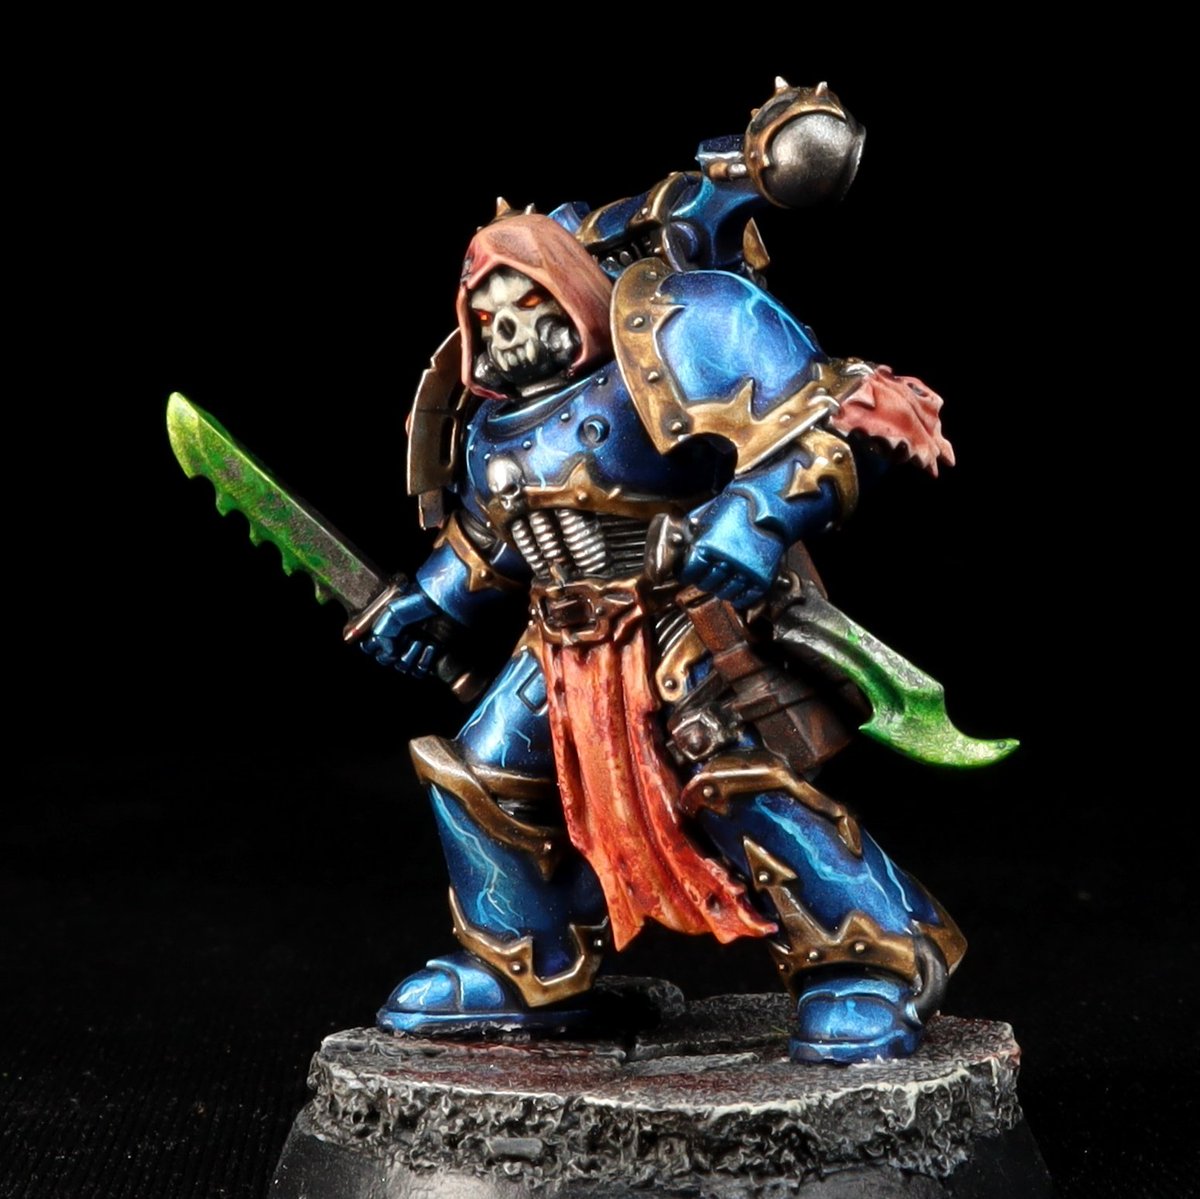 Made a Fearmonger for my Night Lords killteam. I swapped the old Forge World helmet on the guy in my recent video, for one of the sassy new kill team heads. Then poisoned the blades (tutorial here: youtu.be/uLhtsRPKTXw?si…)

#warhammer #warhammer40k #killteam #nightlords